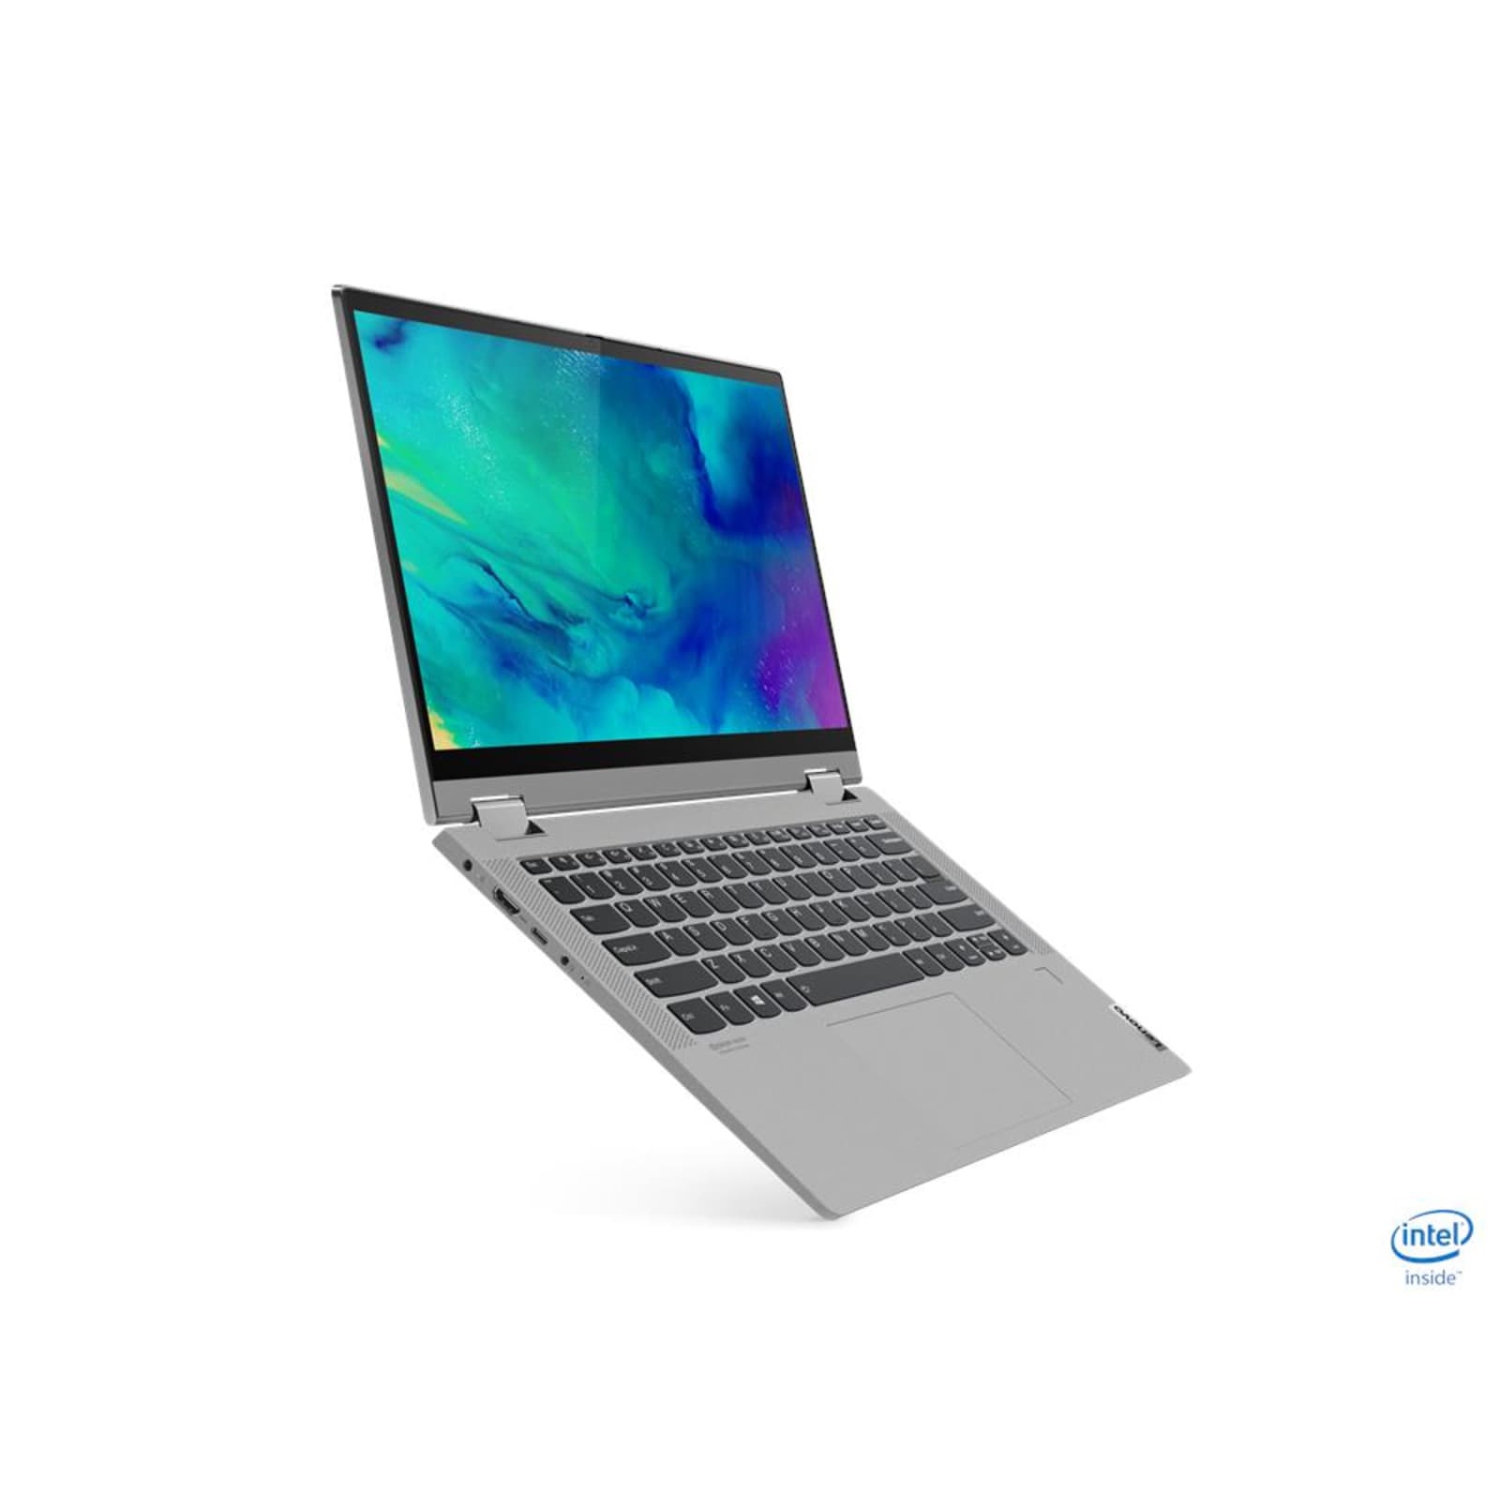 Refurbished (Excellent) Lenovo IdeaPad Flex 5 14ITL05 2-in-1 Laptop | 14" 1920x1080 FHD | Core i3-1115G4 - 512GB SSD Hard Drive - 8GB RAM | 2 cores @ 4.1 GHz Win 11 Home Silver